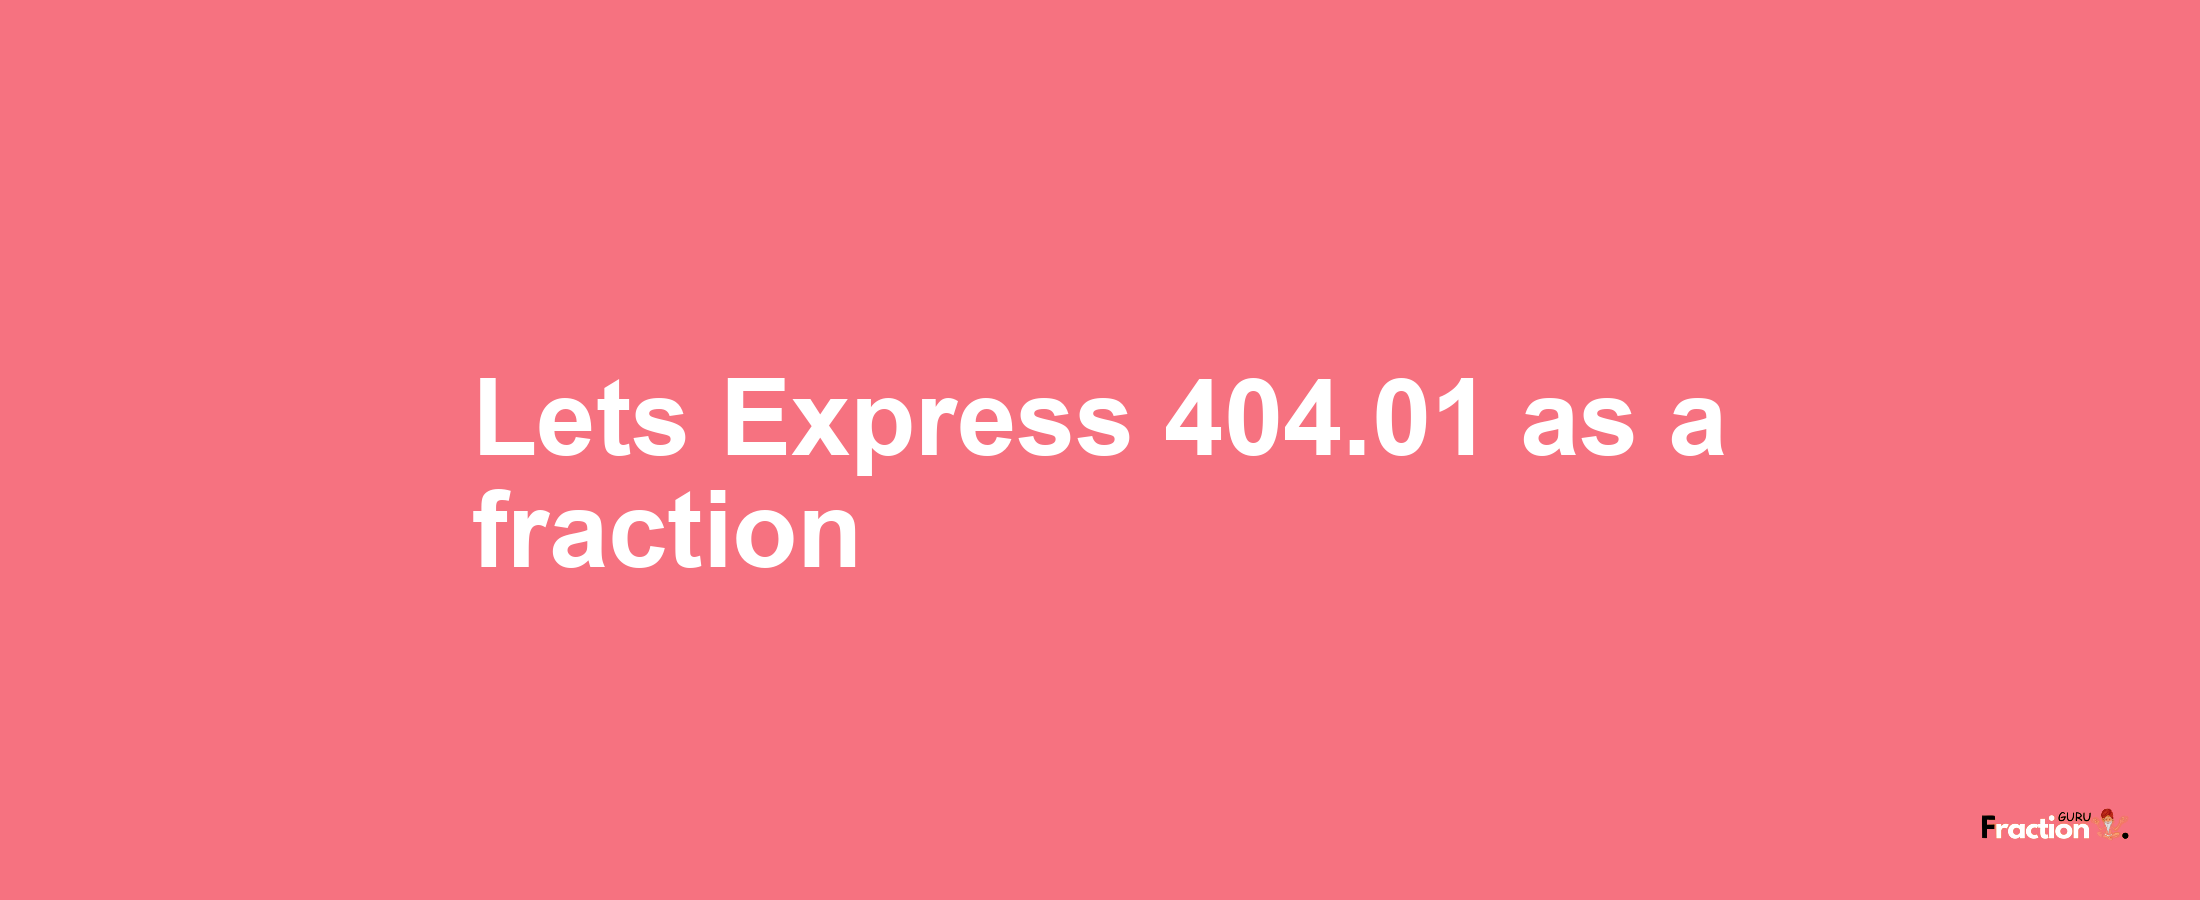 Lets Express 404.01 as afraction